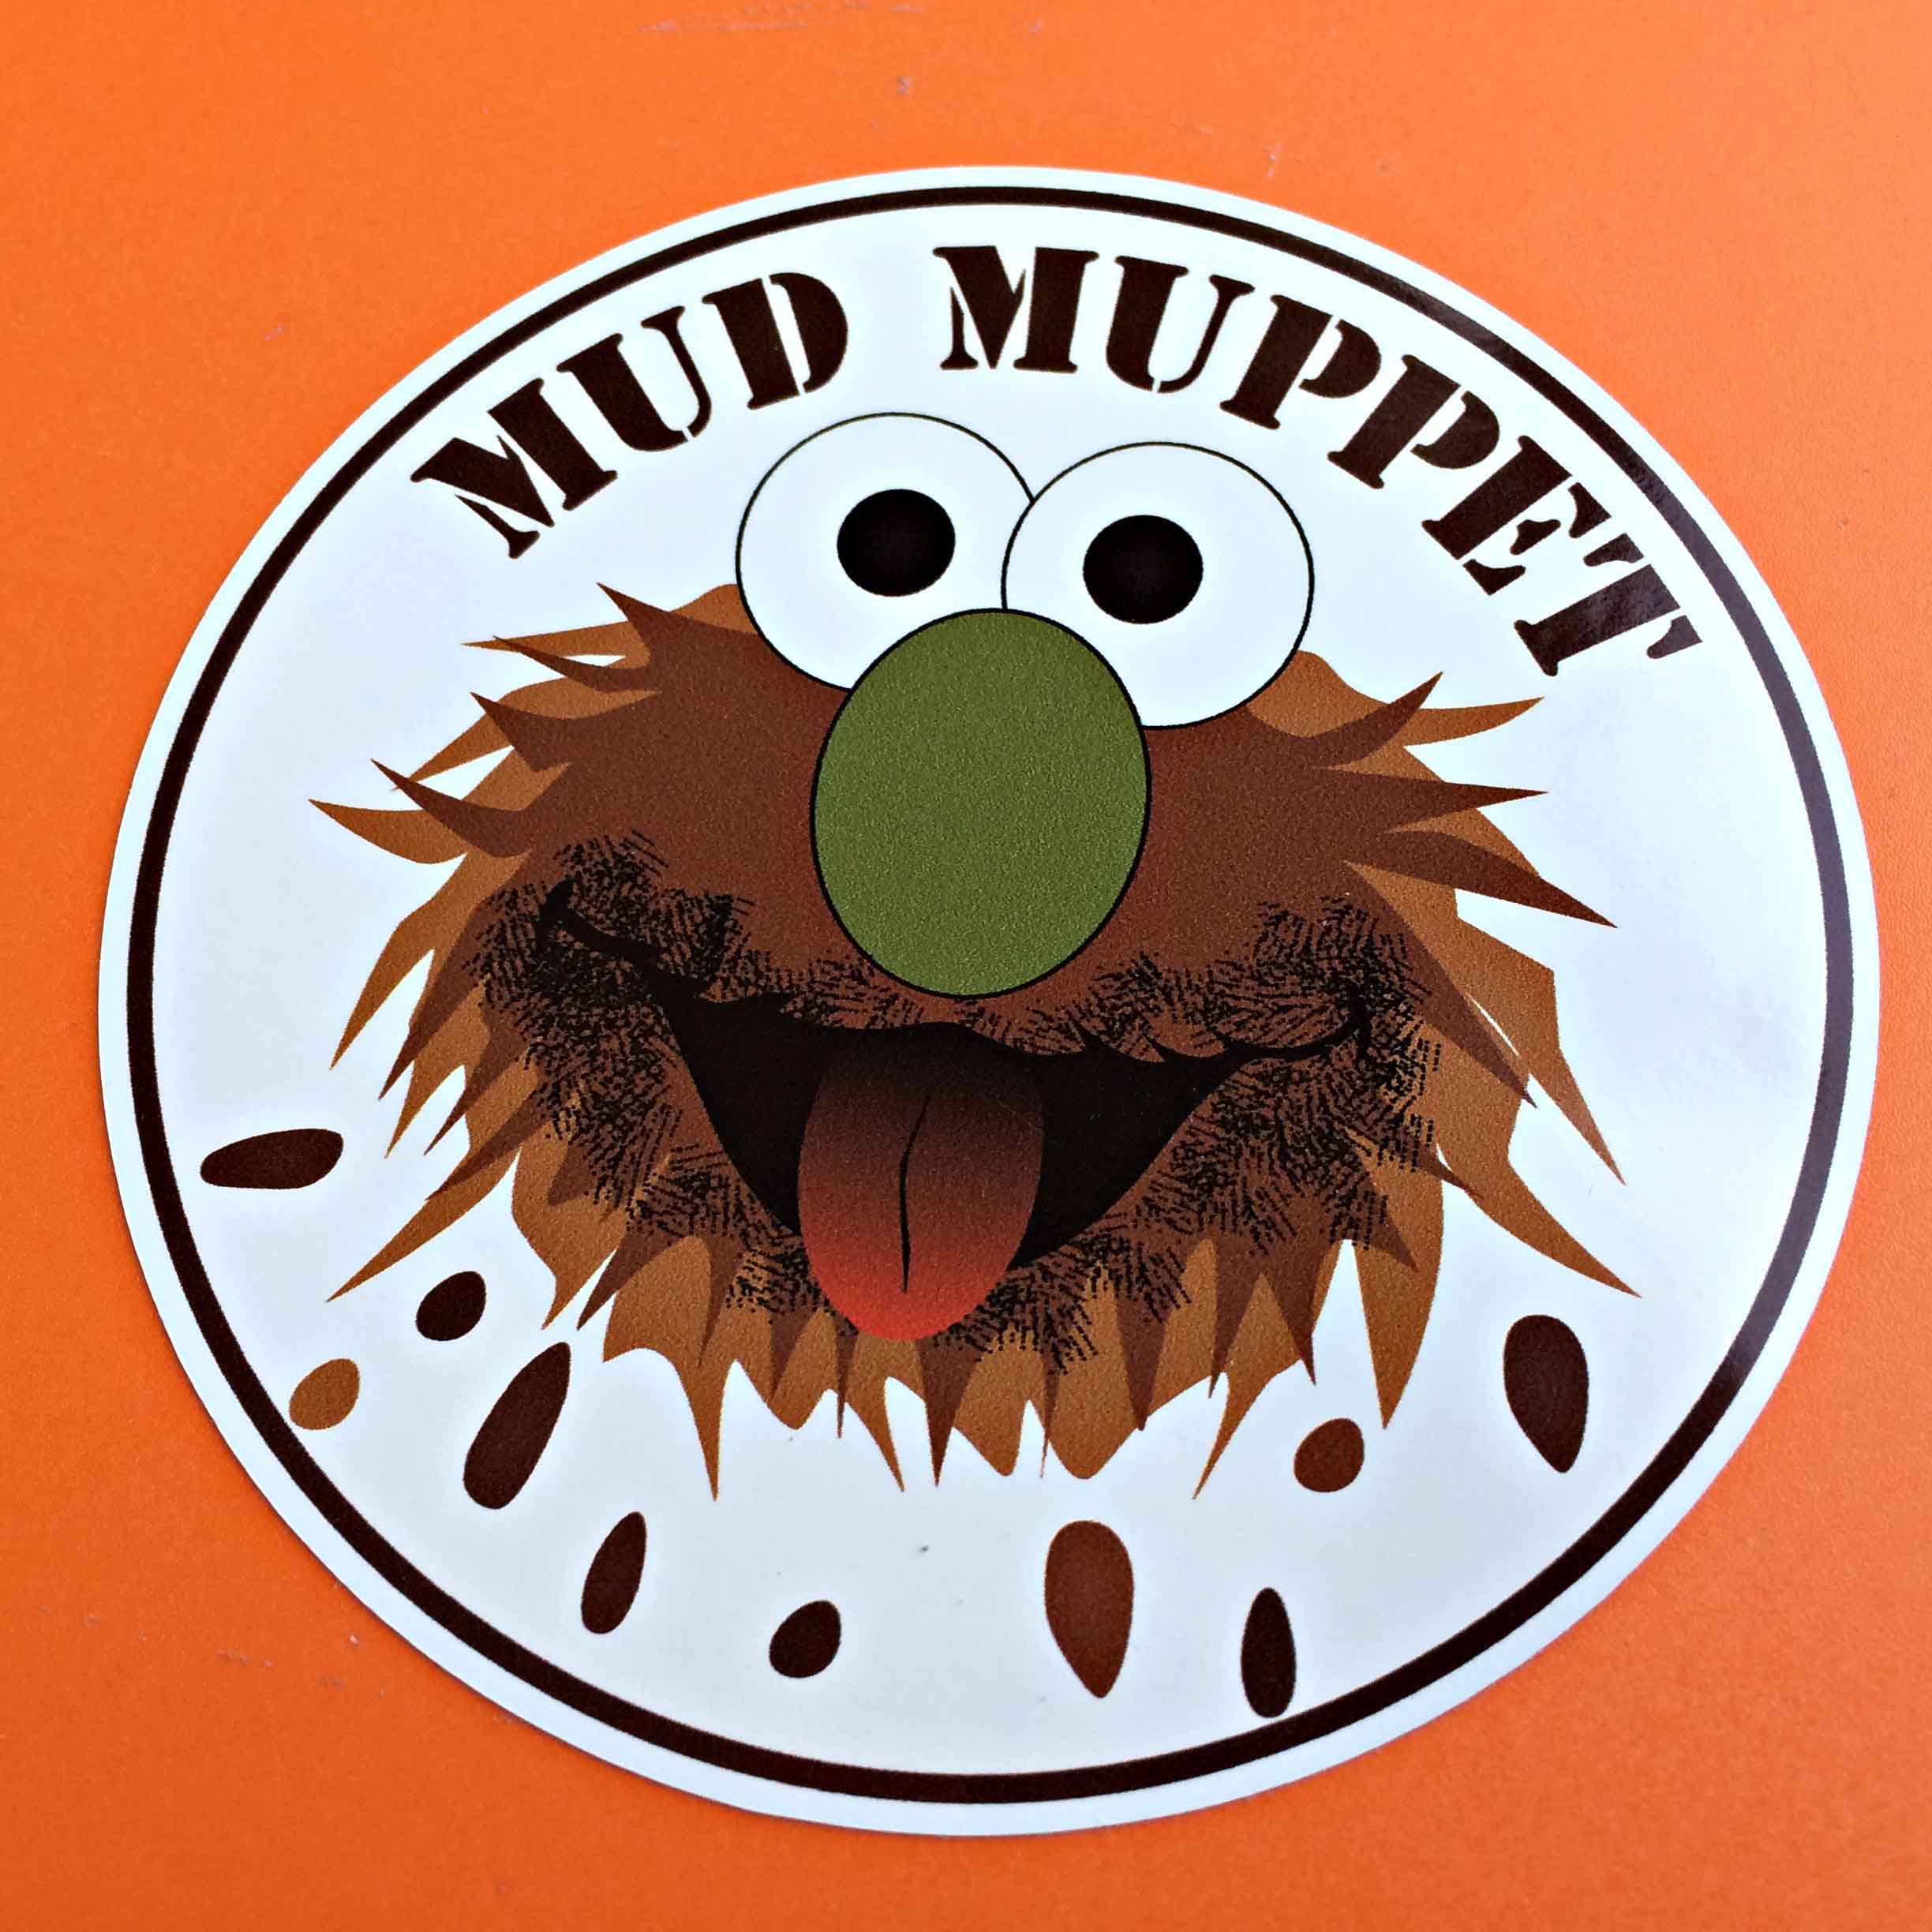 Mud Muppet in black lettering. A Muppet character with brown fur, a green nose, a red tongue and black and white eyes. Below are brown mud splatters.